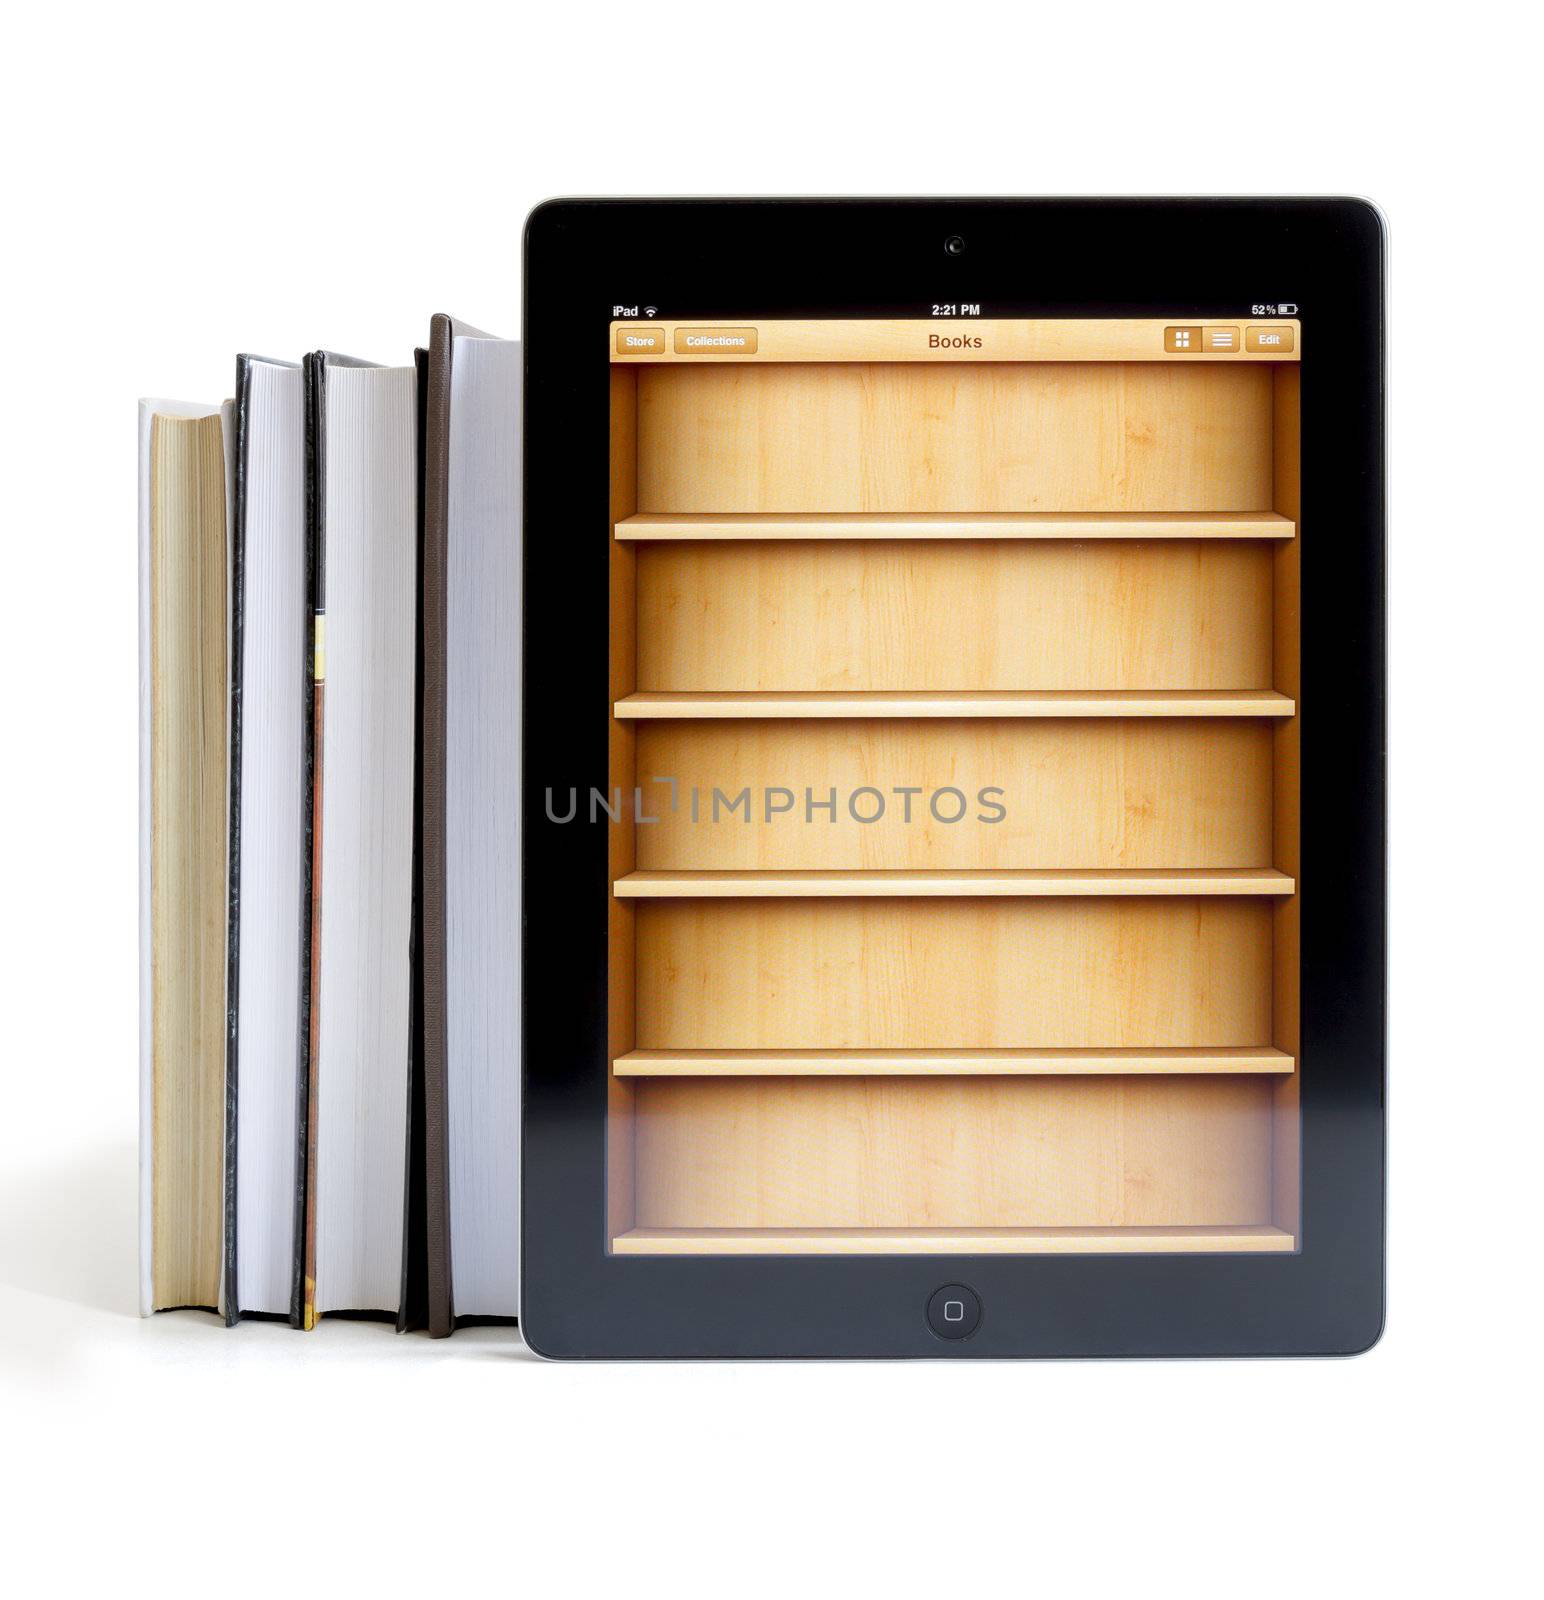 Ipad 3 with Books application on white background